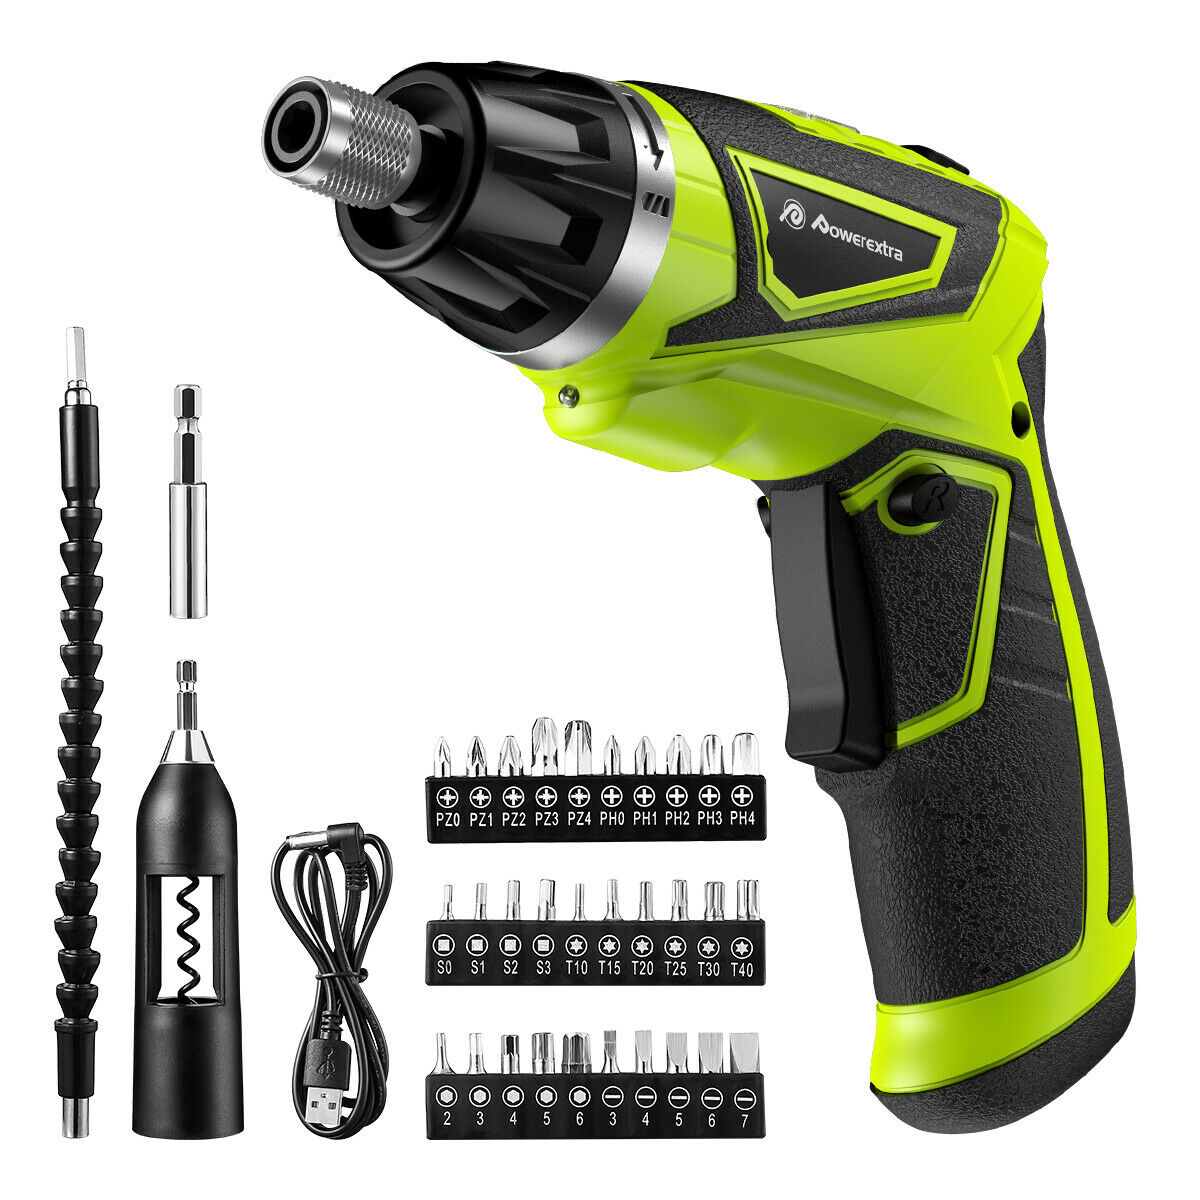 Cordless Electric Screwdriver Drill Power Tool Kits & 2.0ah Rechargeable Battery